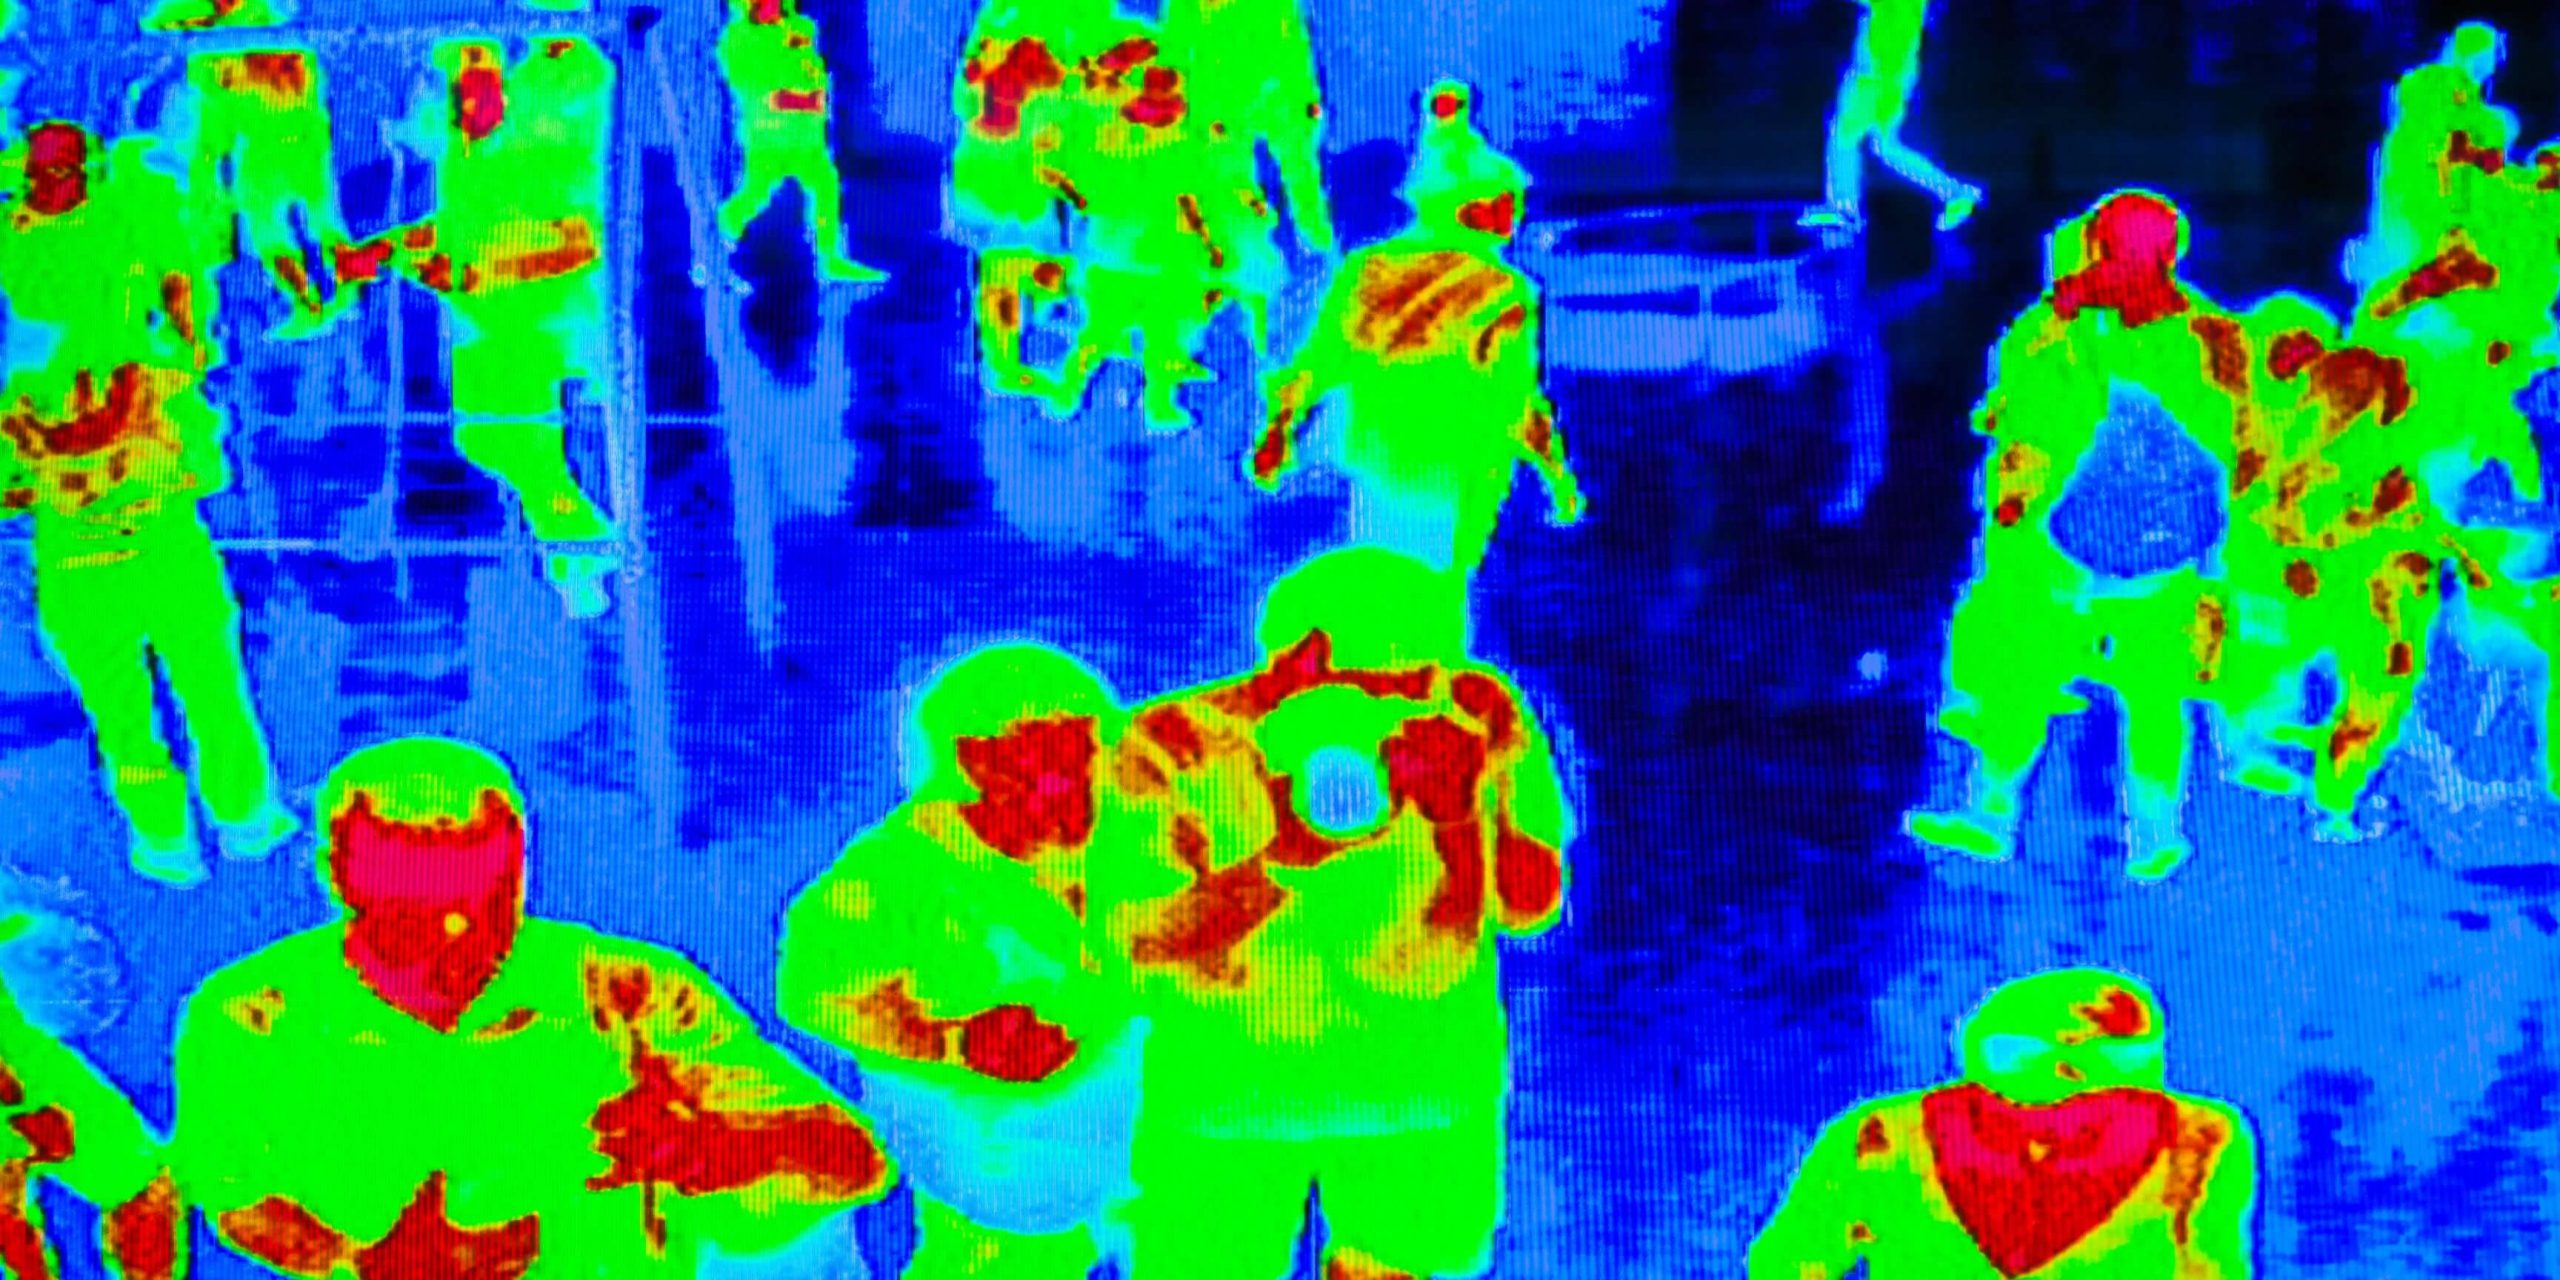 infrared image of crowds